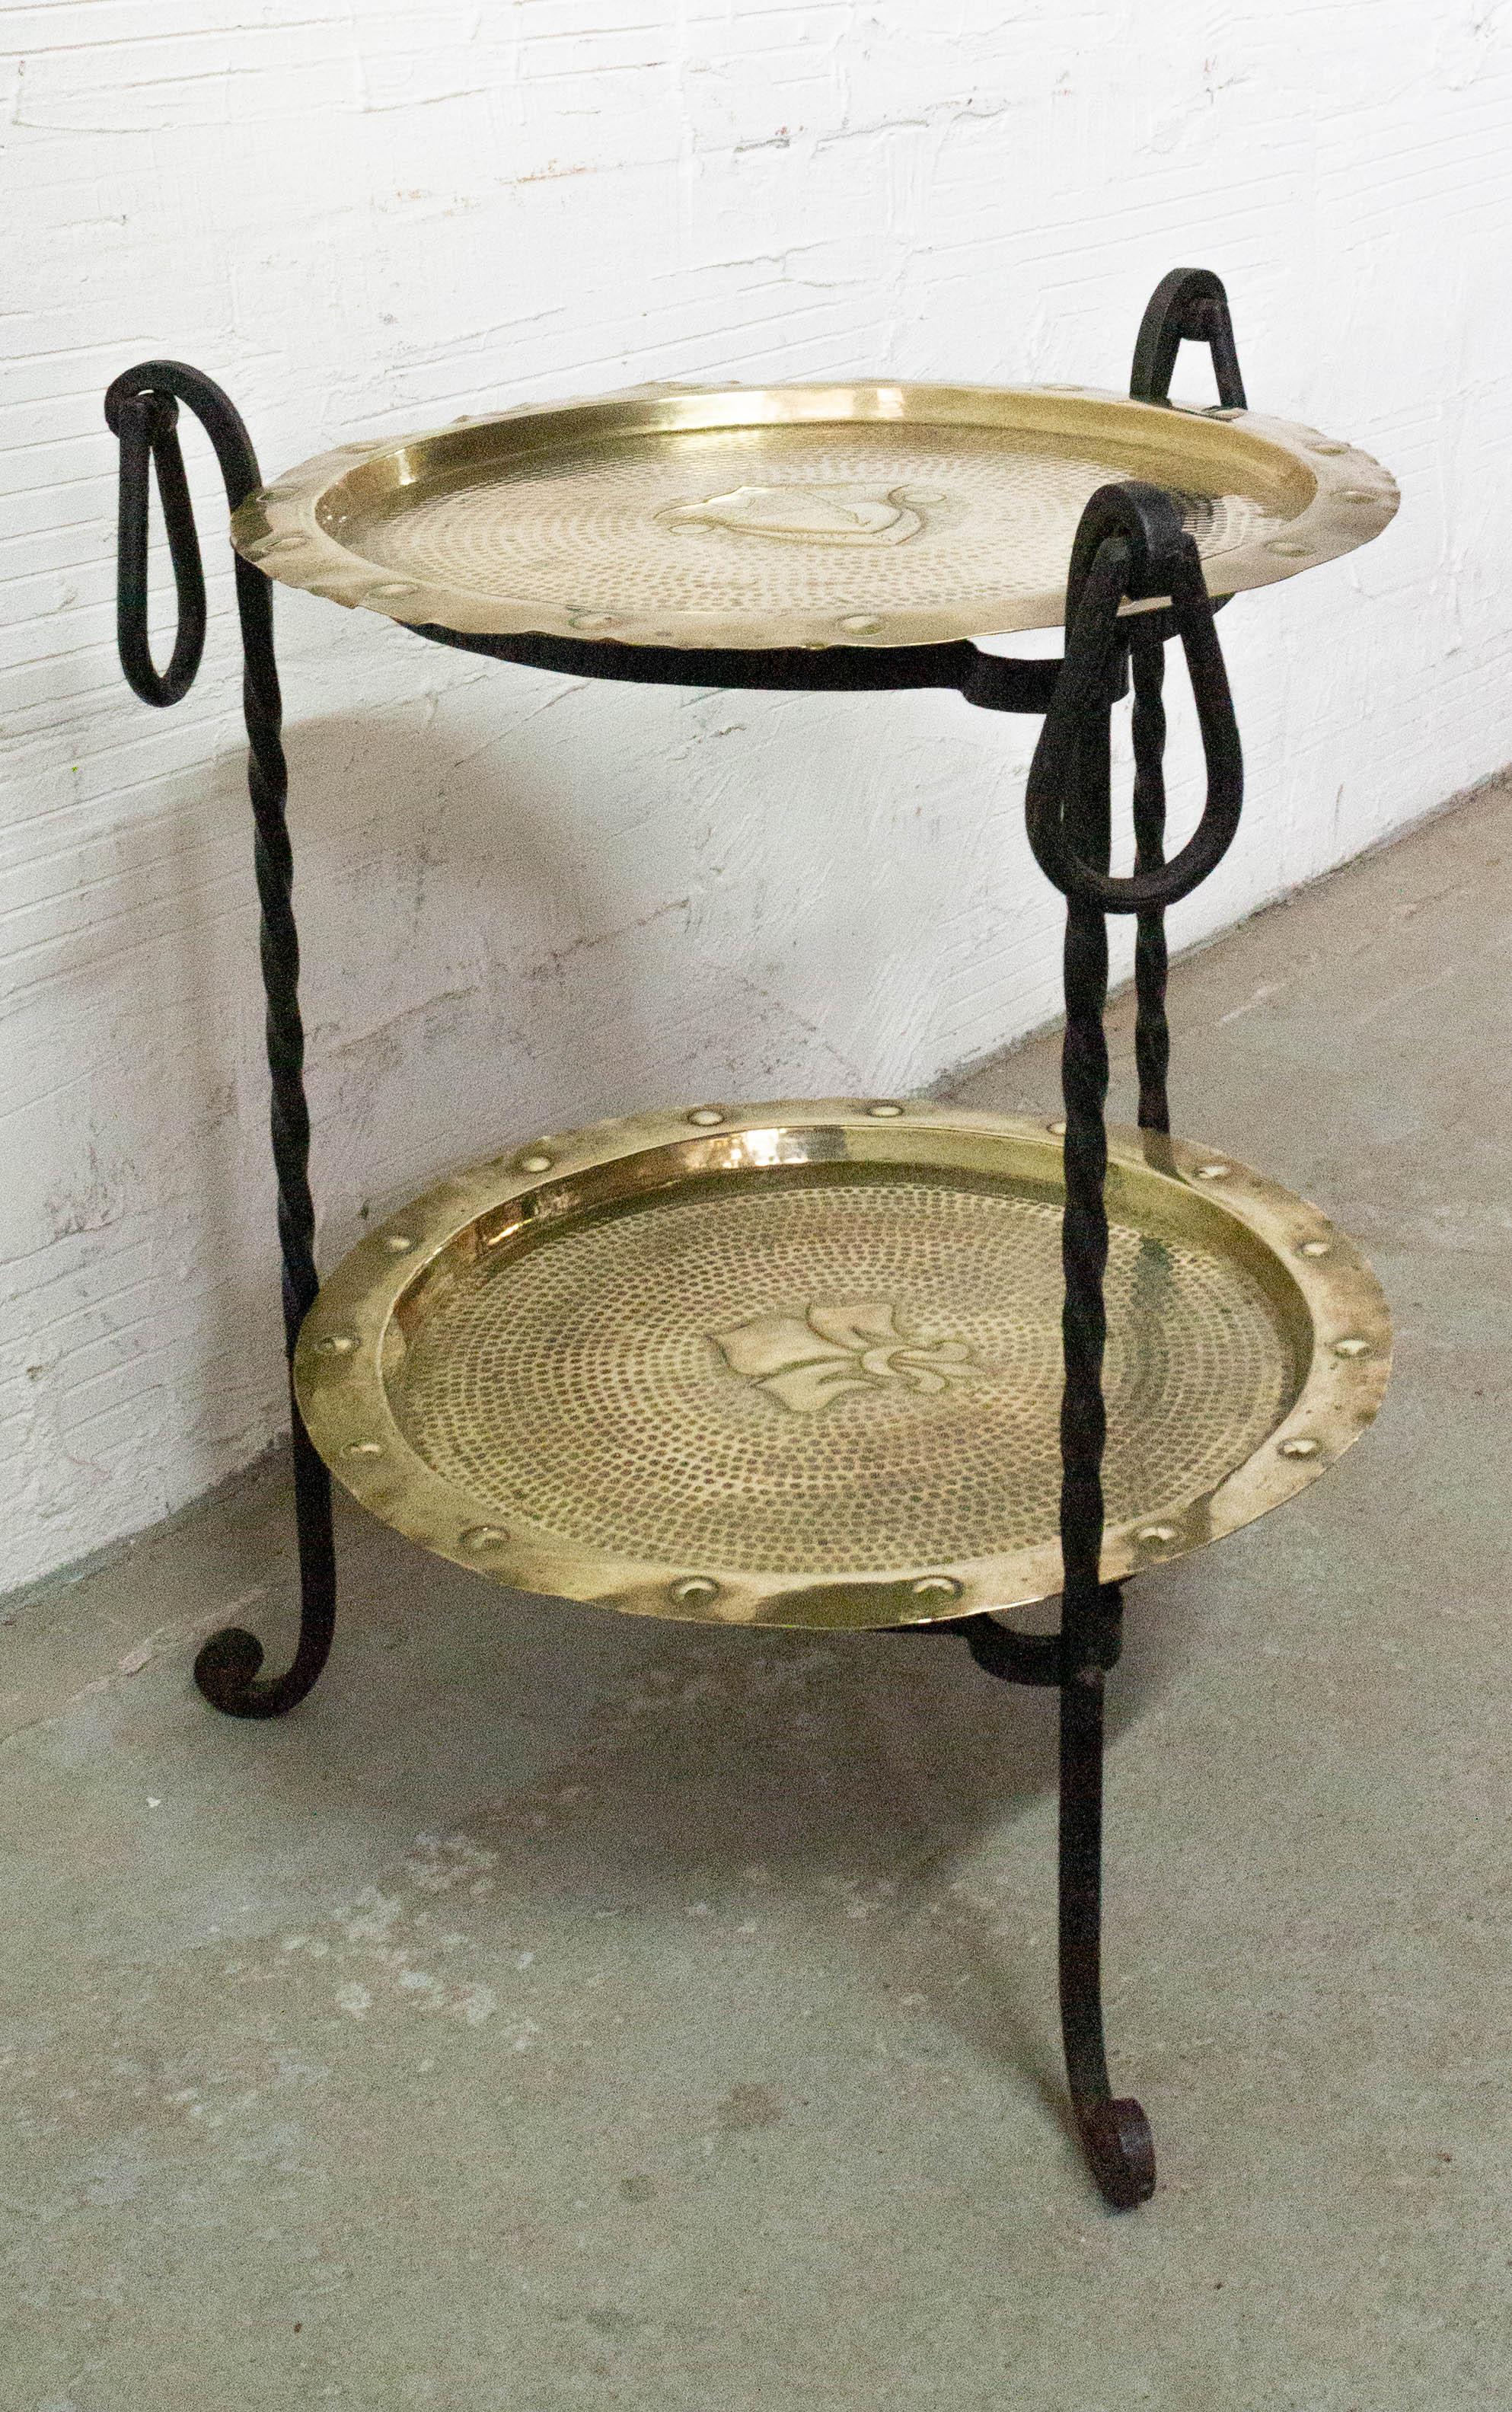 Midcentury side or end table, France
Can also be used as coffee table or plant holder
Copper and wrought iron
The patterns in the middle of the trays are a fleur-de-lis and a tower in the middle of a landscape
Measures: Diameter of the trays